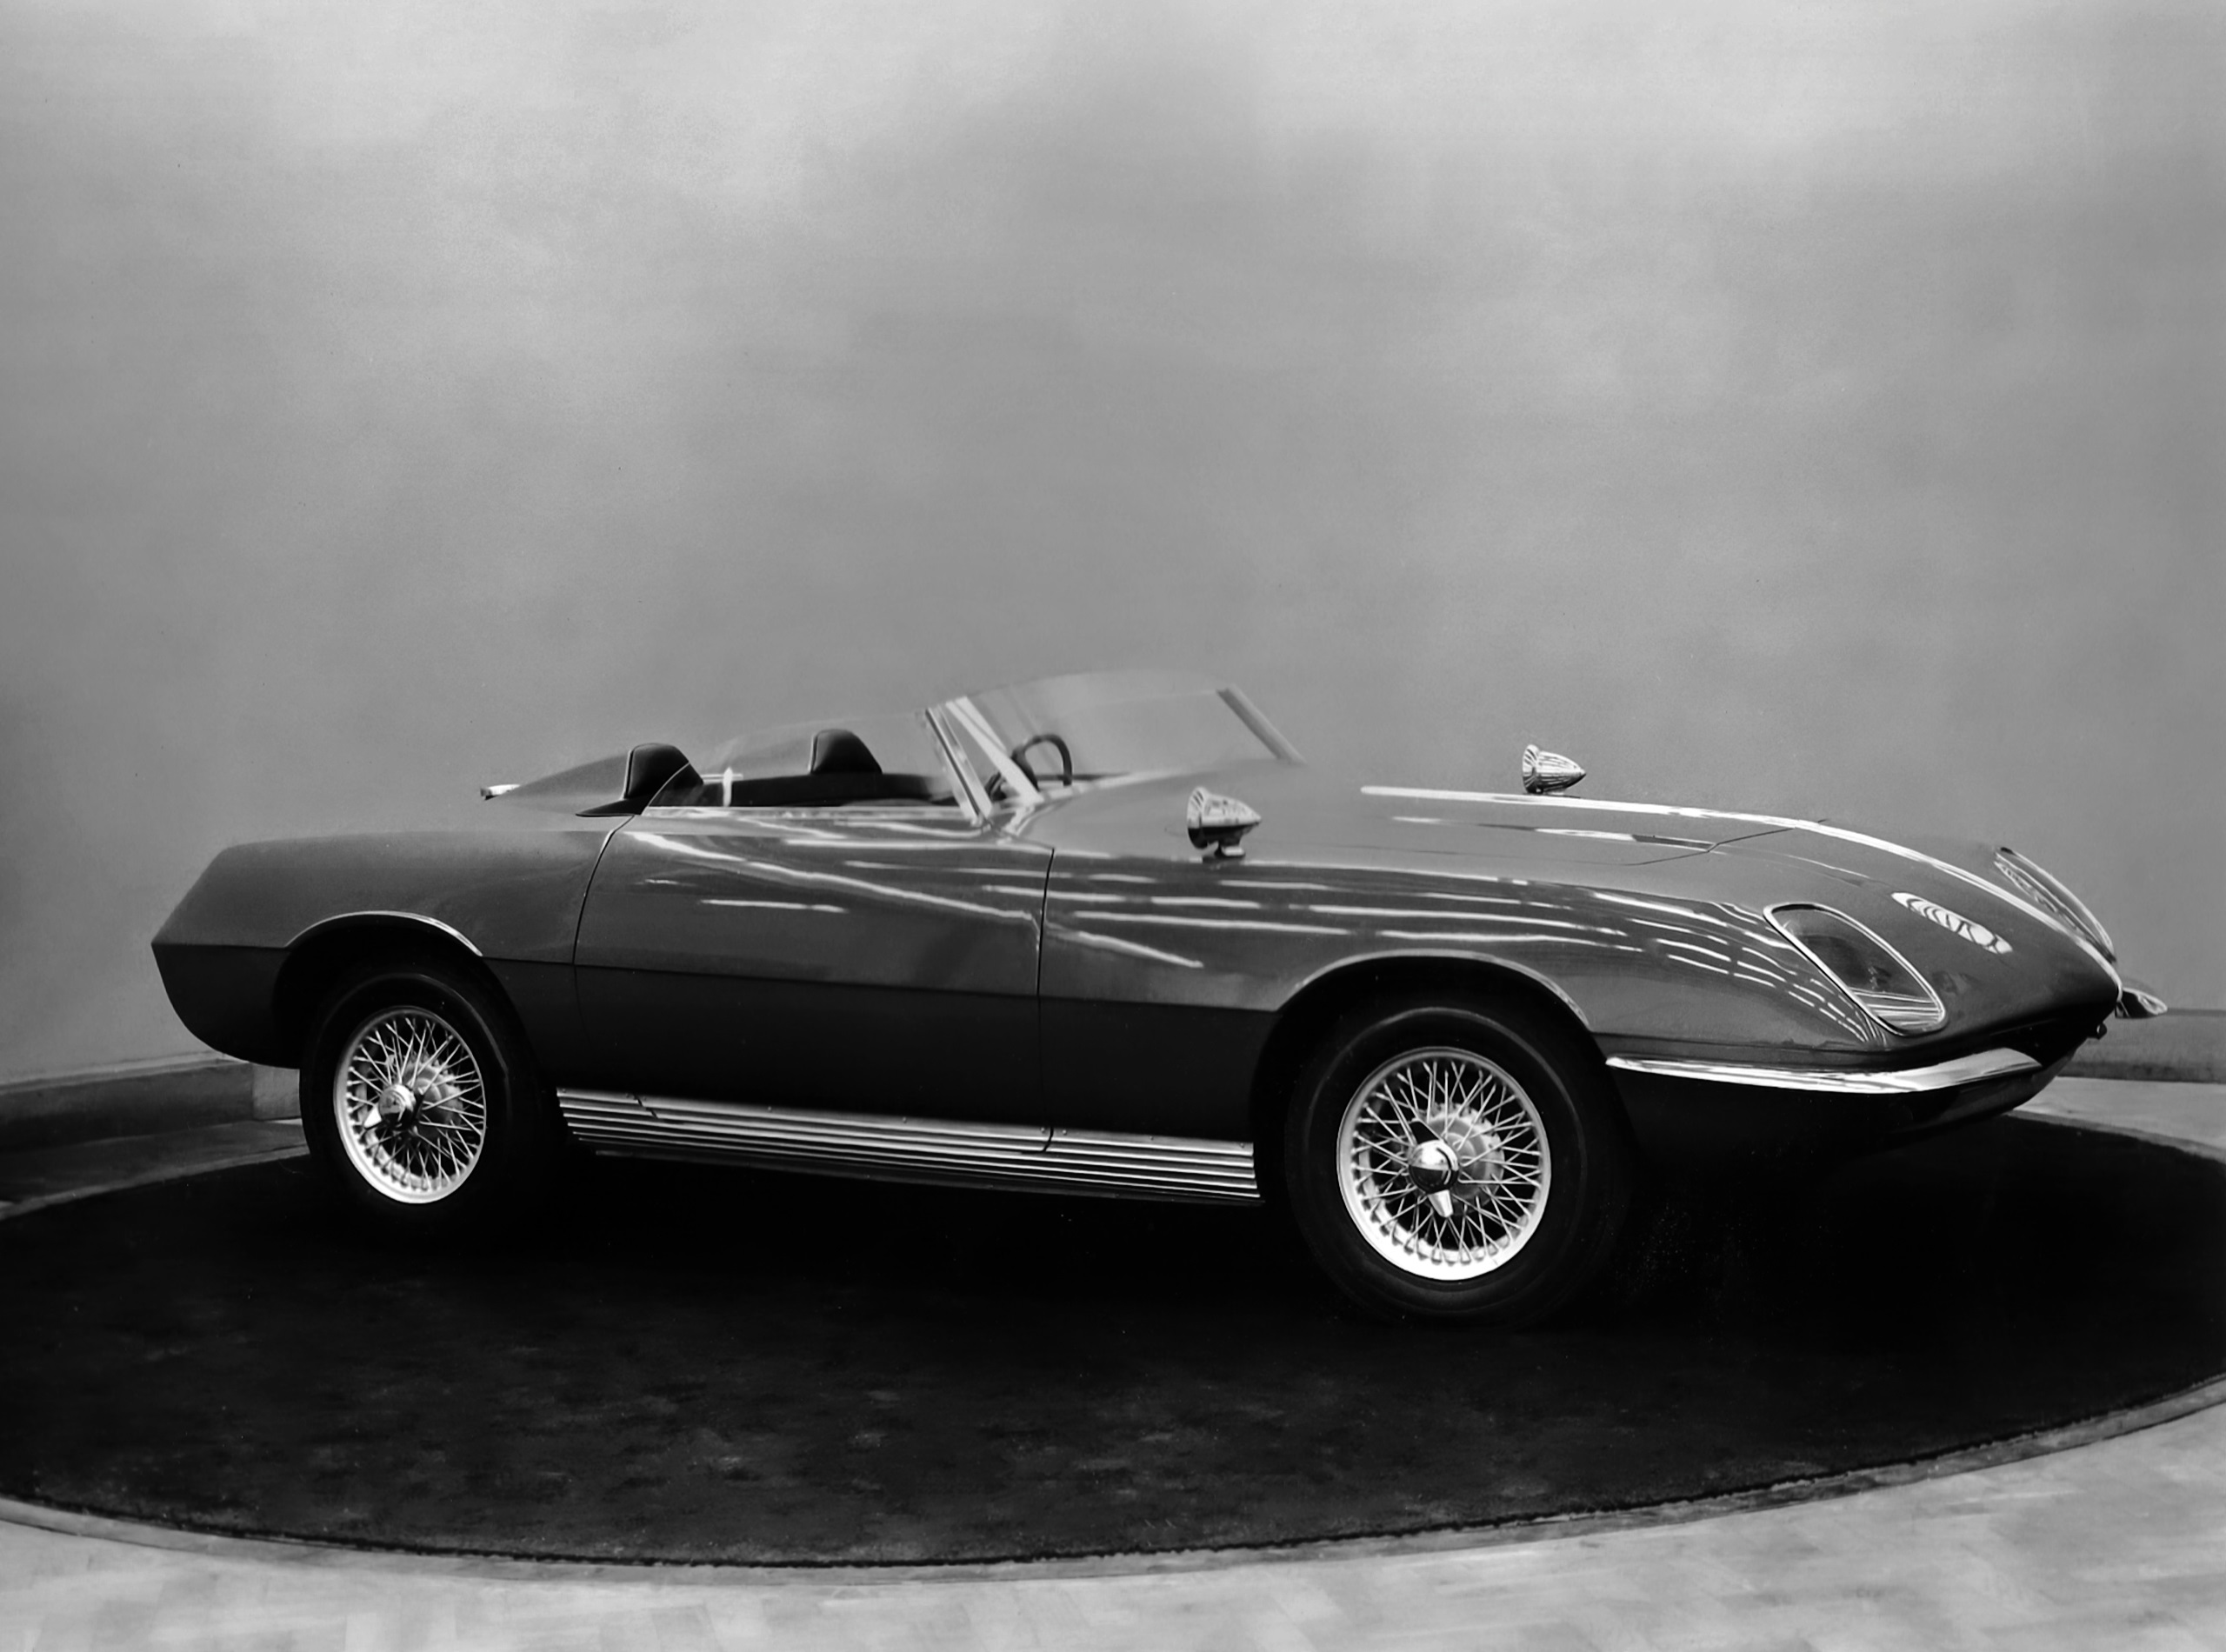 1963 Vauxhall Piper concept car third iteration